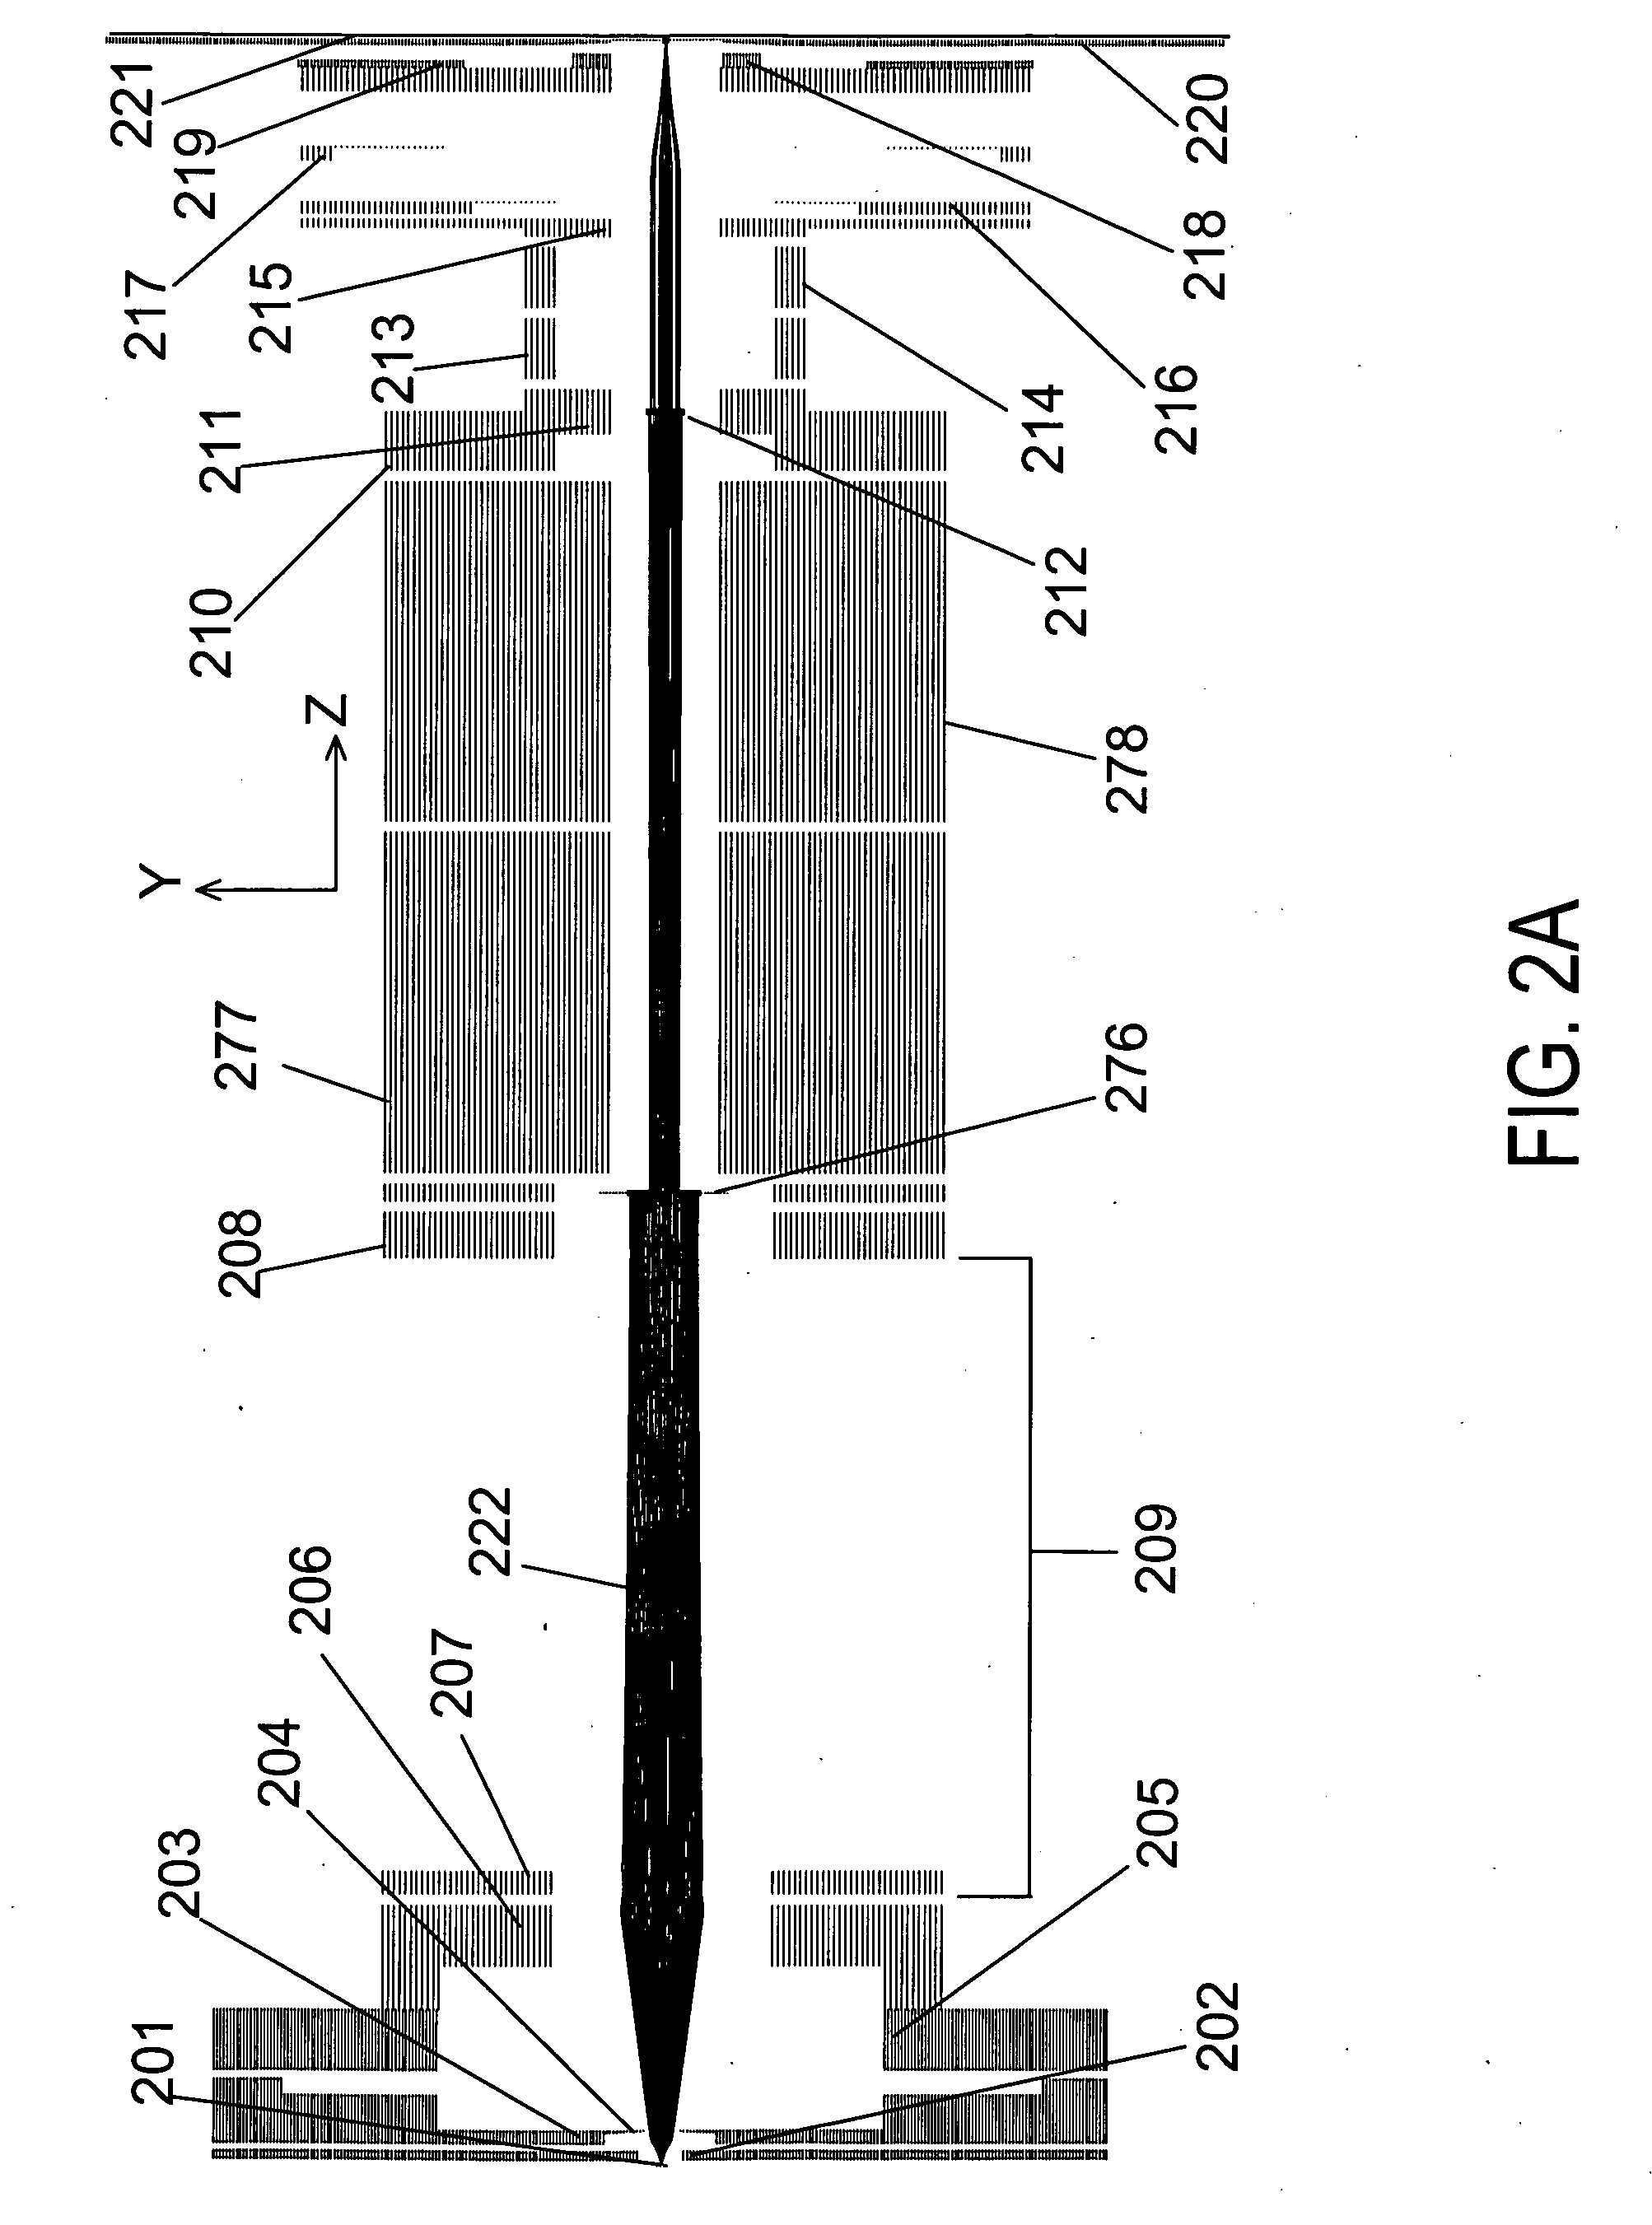 Optics for generation of high current density patterned charged particle beams